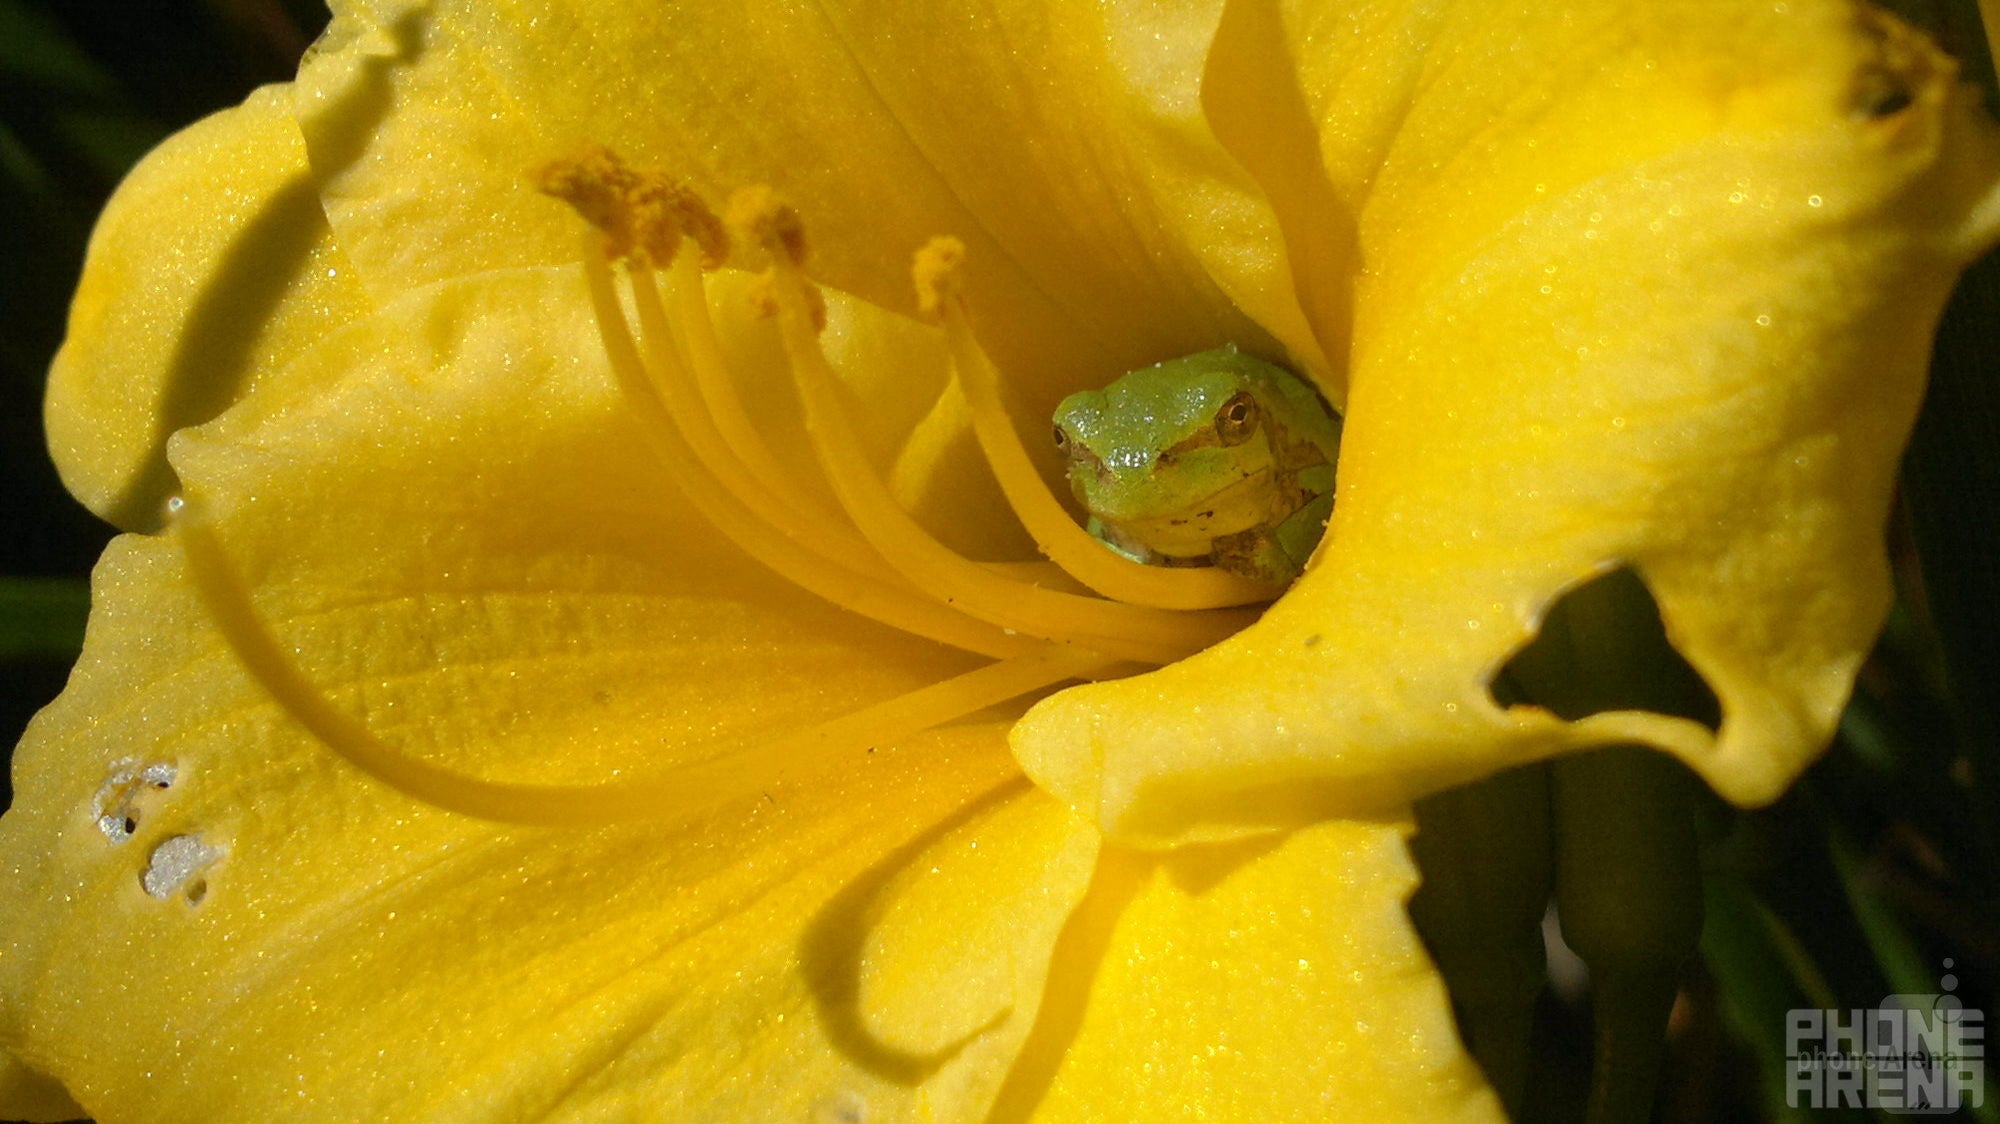 Chris - Nokia N8Frog in flower(last time&#039;s winner) - Cool images, taken with your cell phone #27